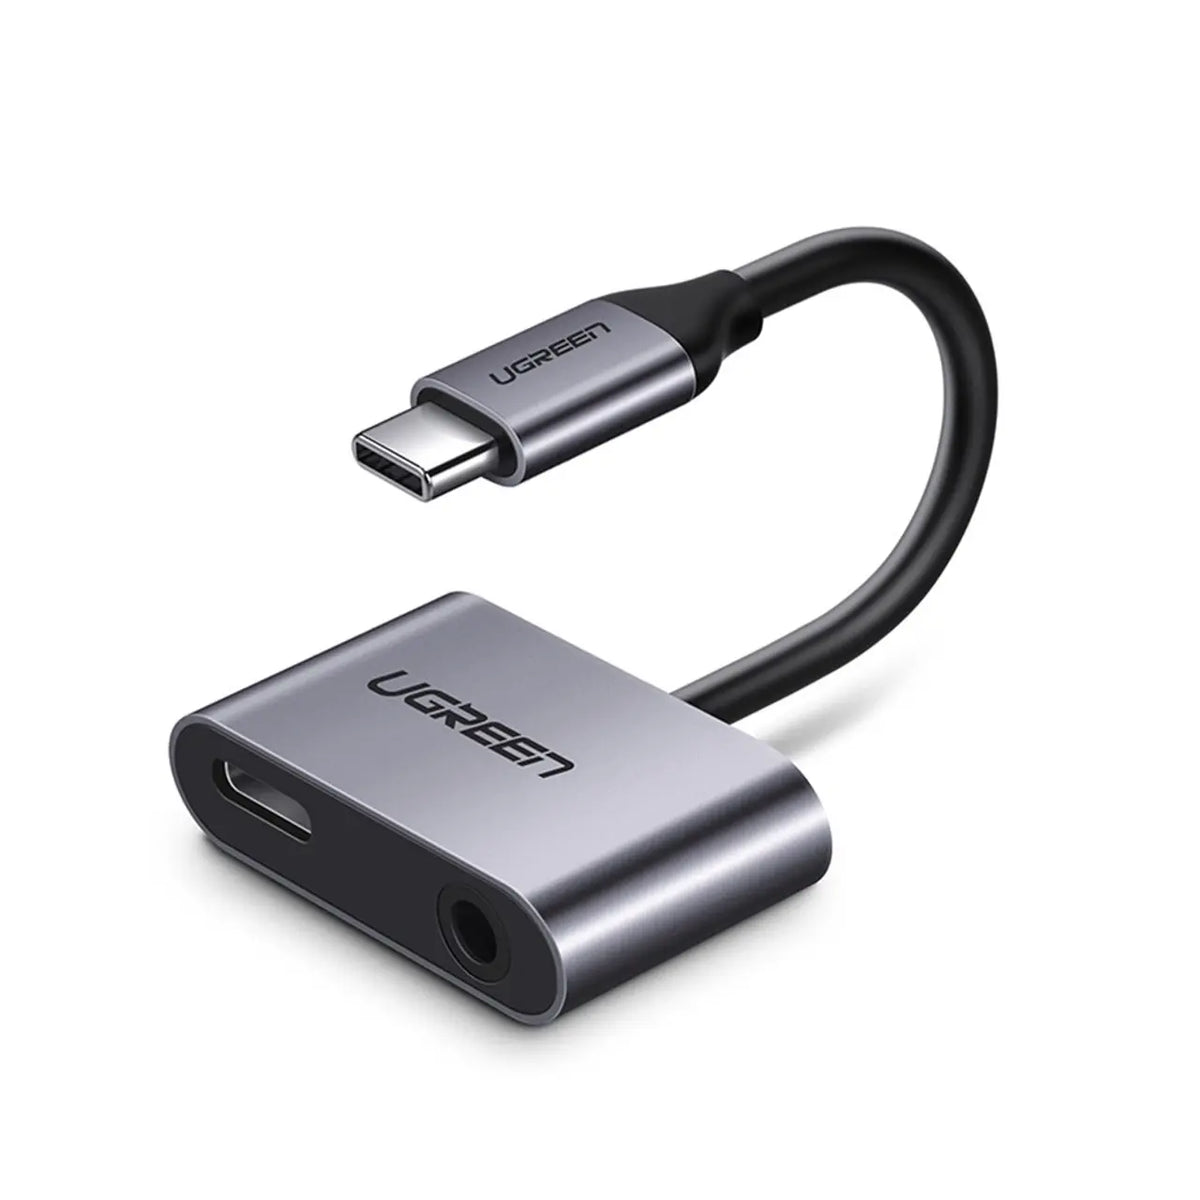 UGreen 2-in-1 USB C to 3.5mm Headphone and Charger Adapter | 60164 Ugreen